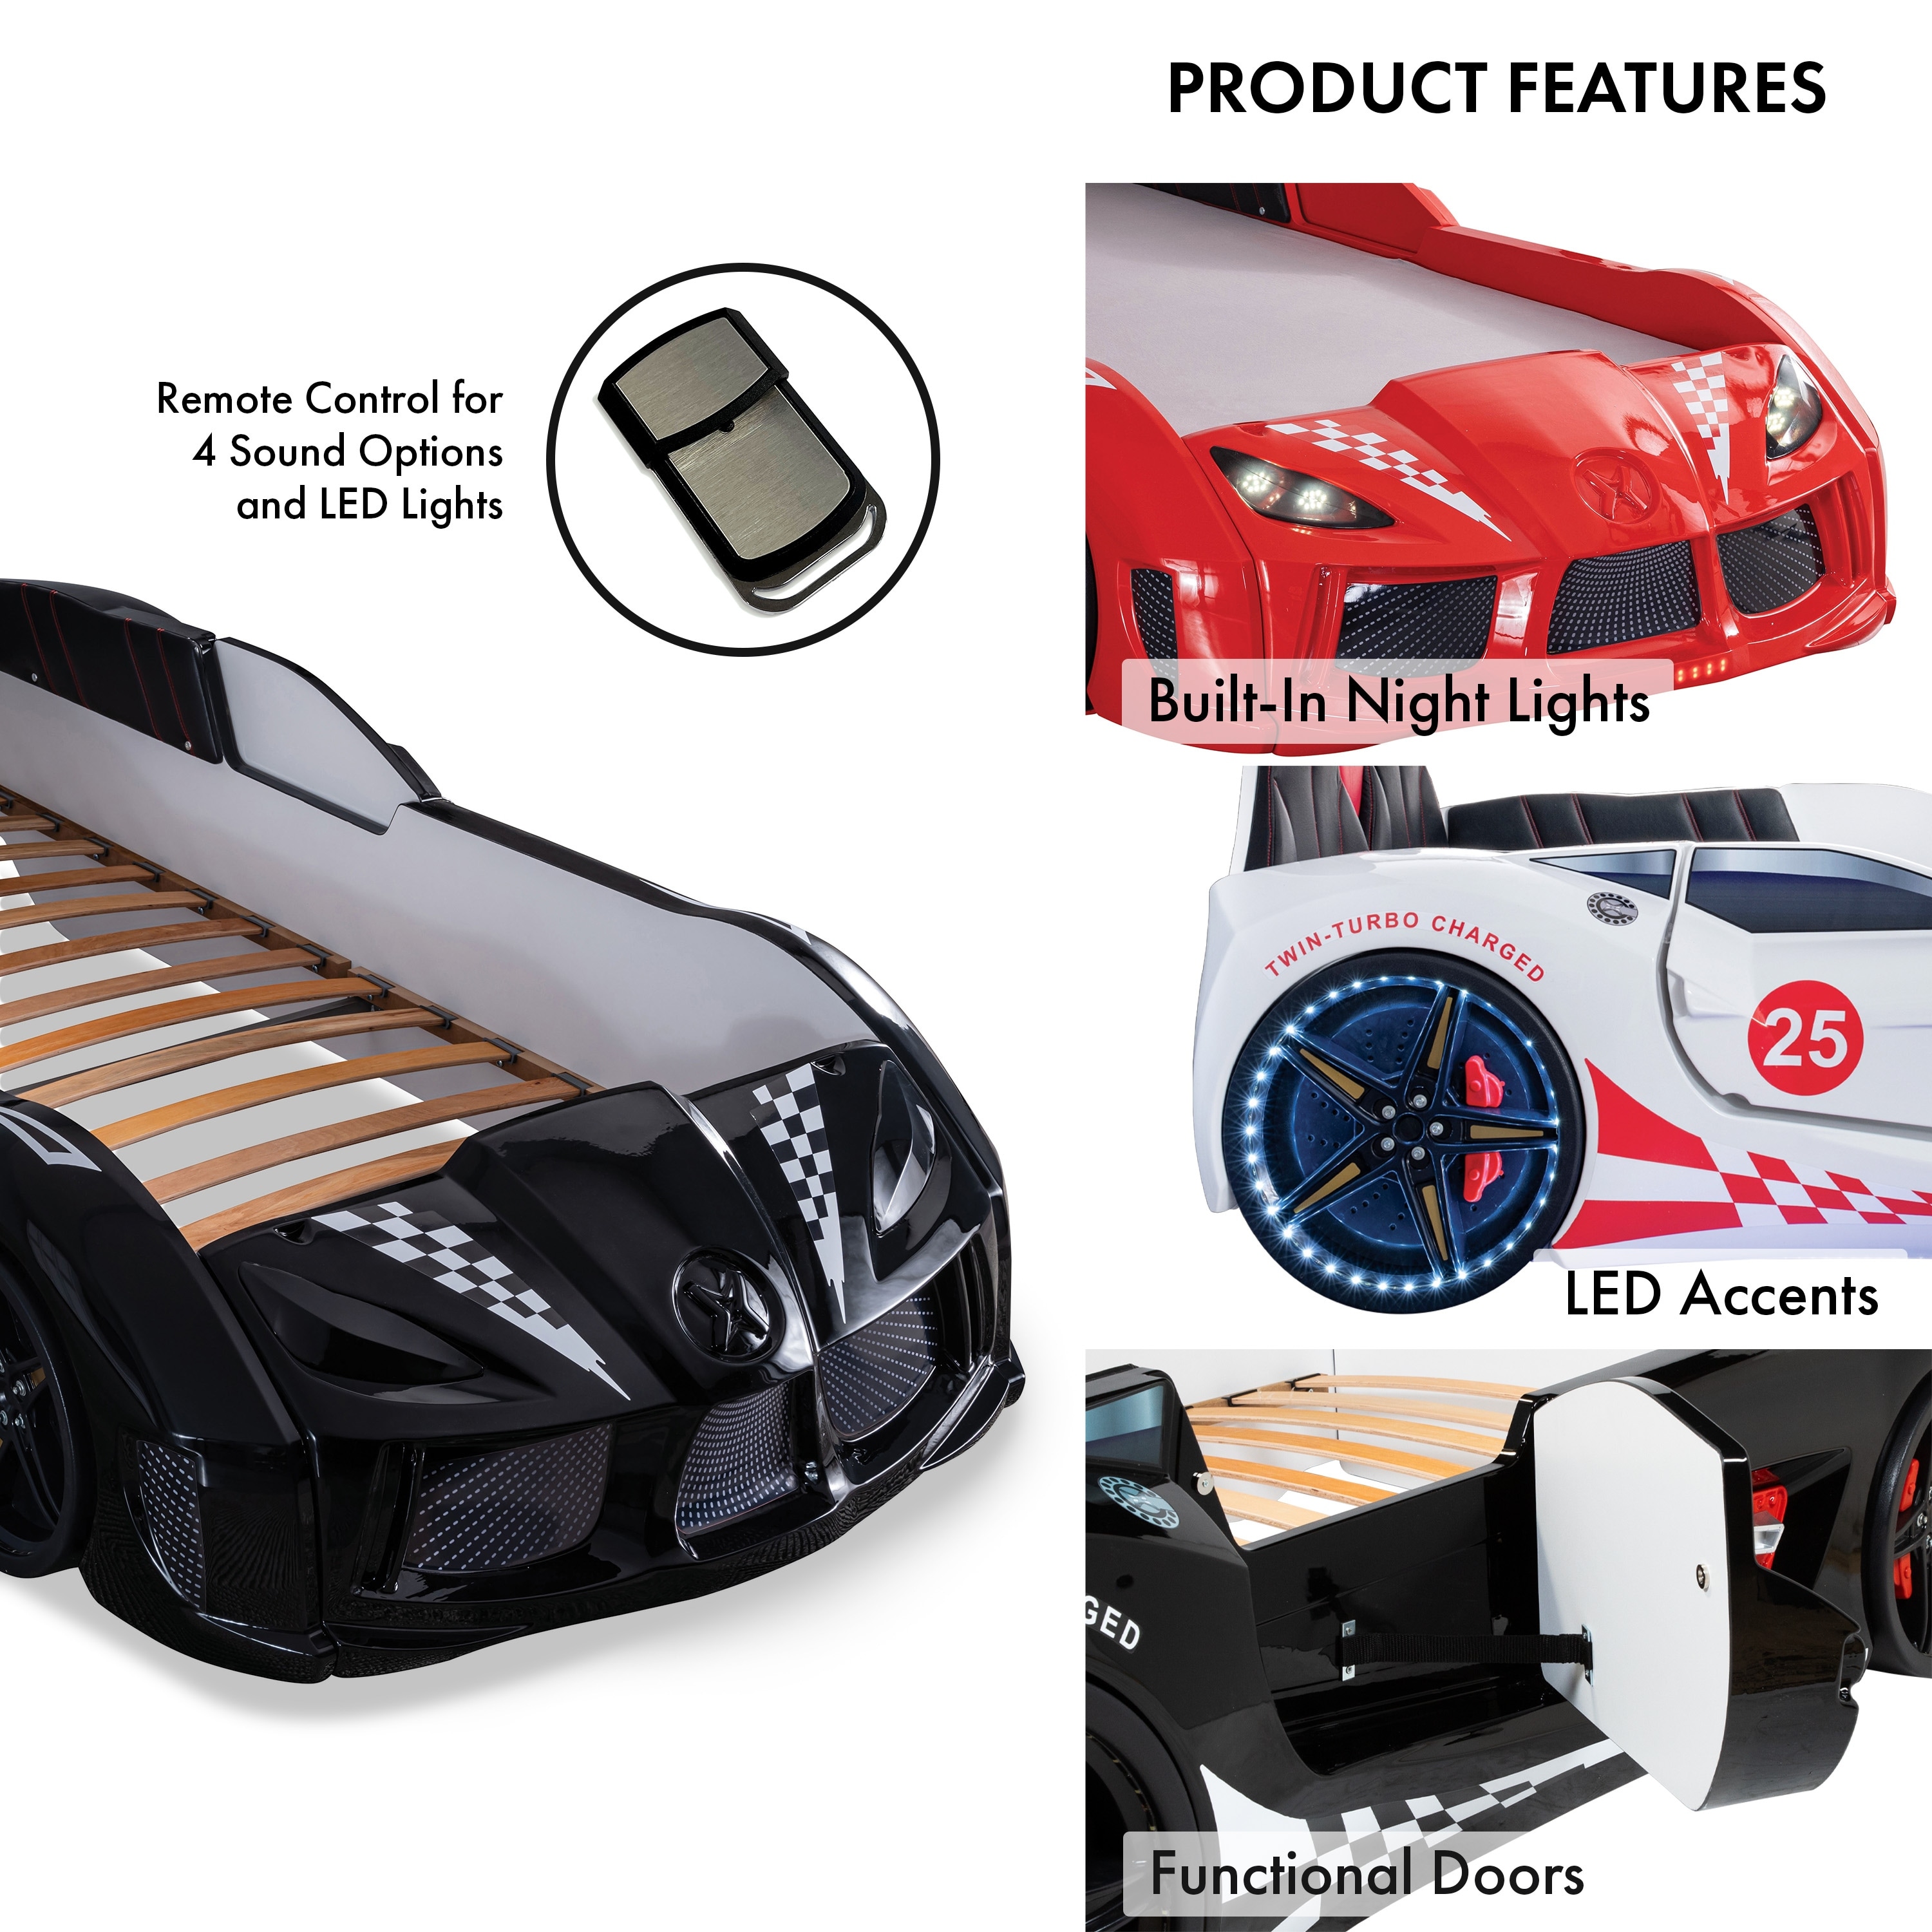 La Vetta Modern Twin Platform Car Bed with LED Lights and Handheld Remote  by Furniture of America - On Sale - Bed Bath & Beyond - 35483505